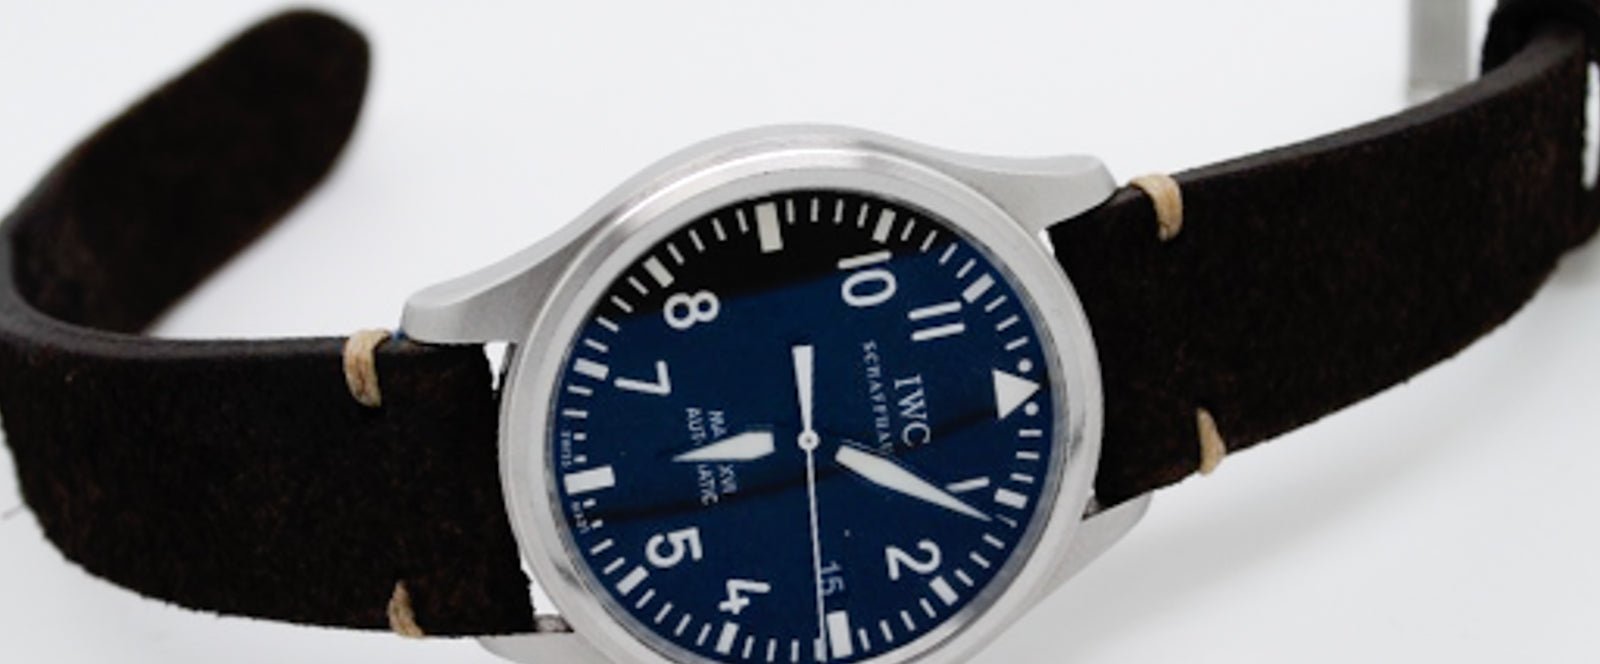 Things to Know About IWC Premium Watches and Their Leather Straps - finwatchstraps